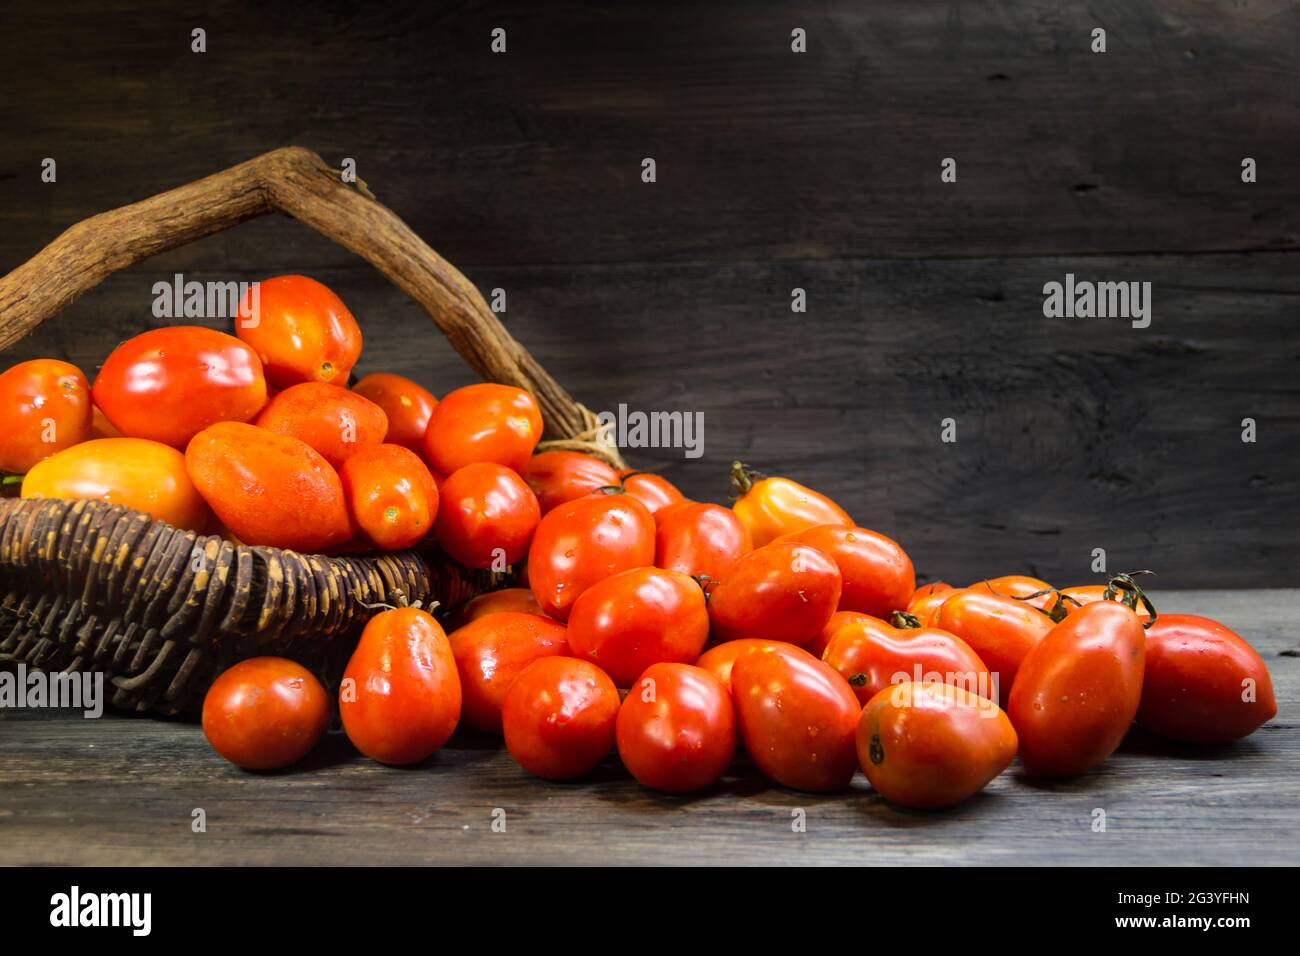 Basket overflowing with pear tomatoes on rustic wood Stock Photo